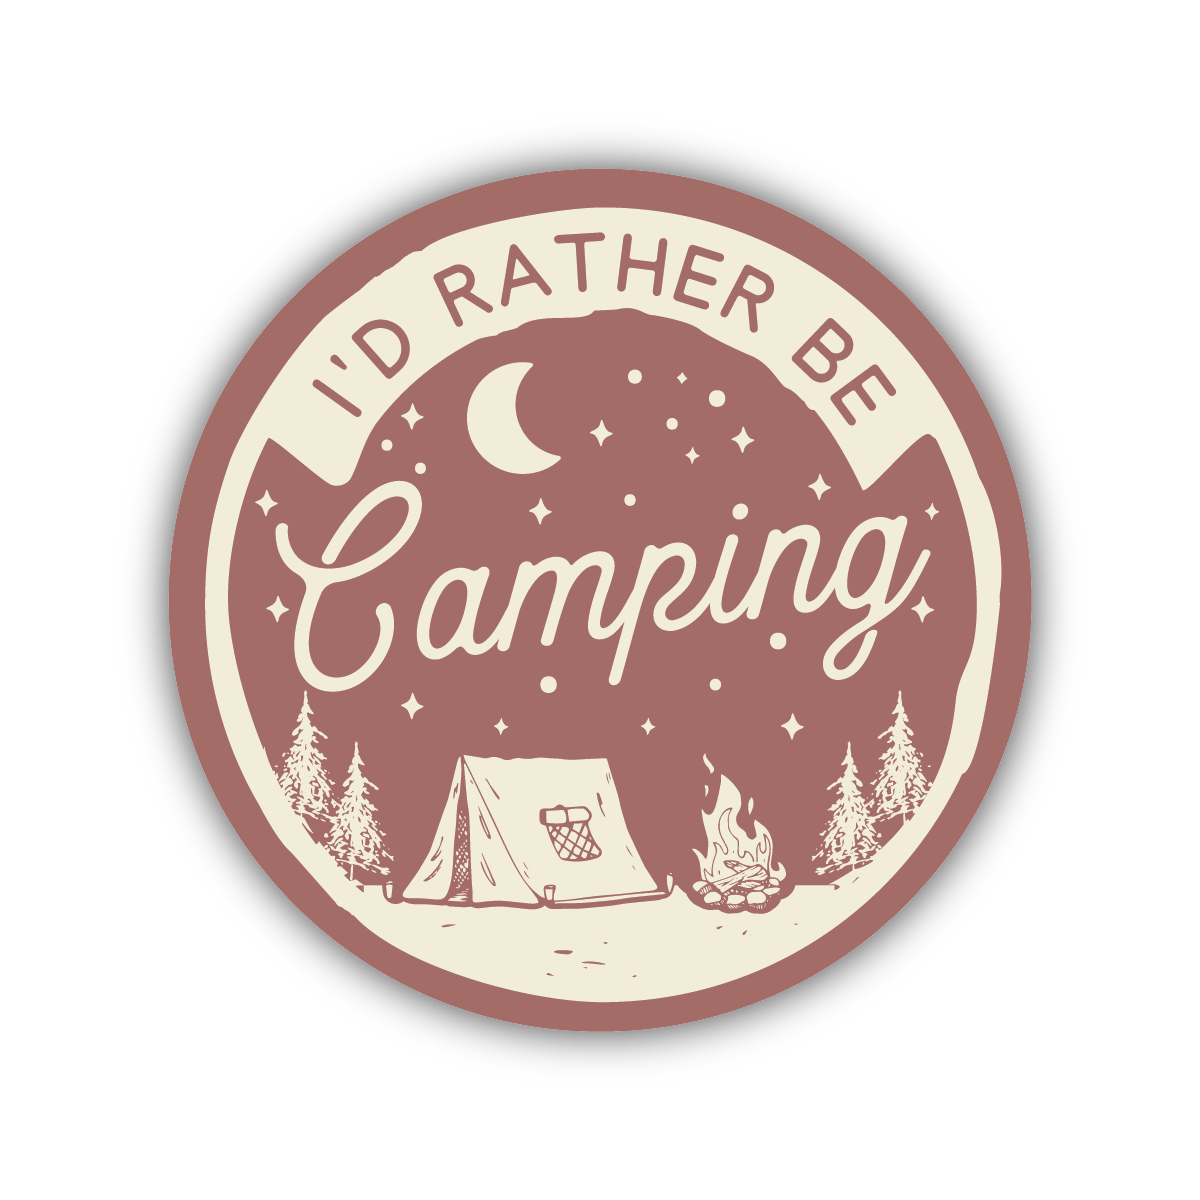 Stickers Northwest - I'd Rather be Camping-Stickers Northwest Inc-Little Giant Kidz